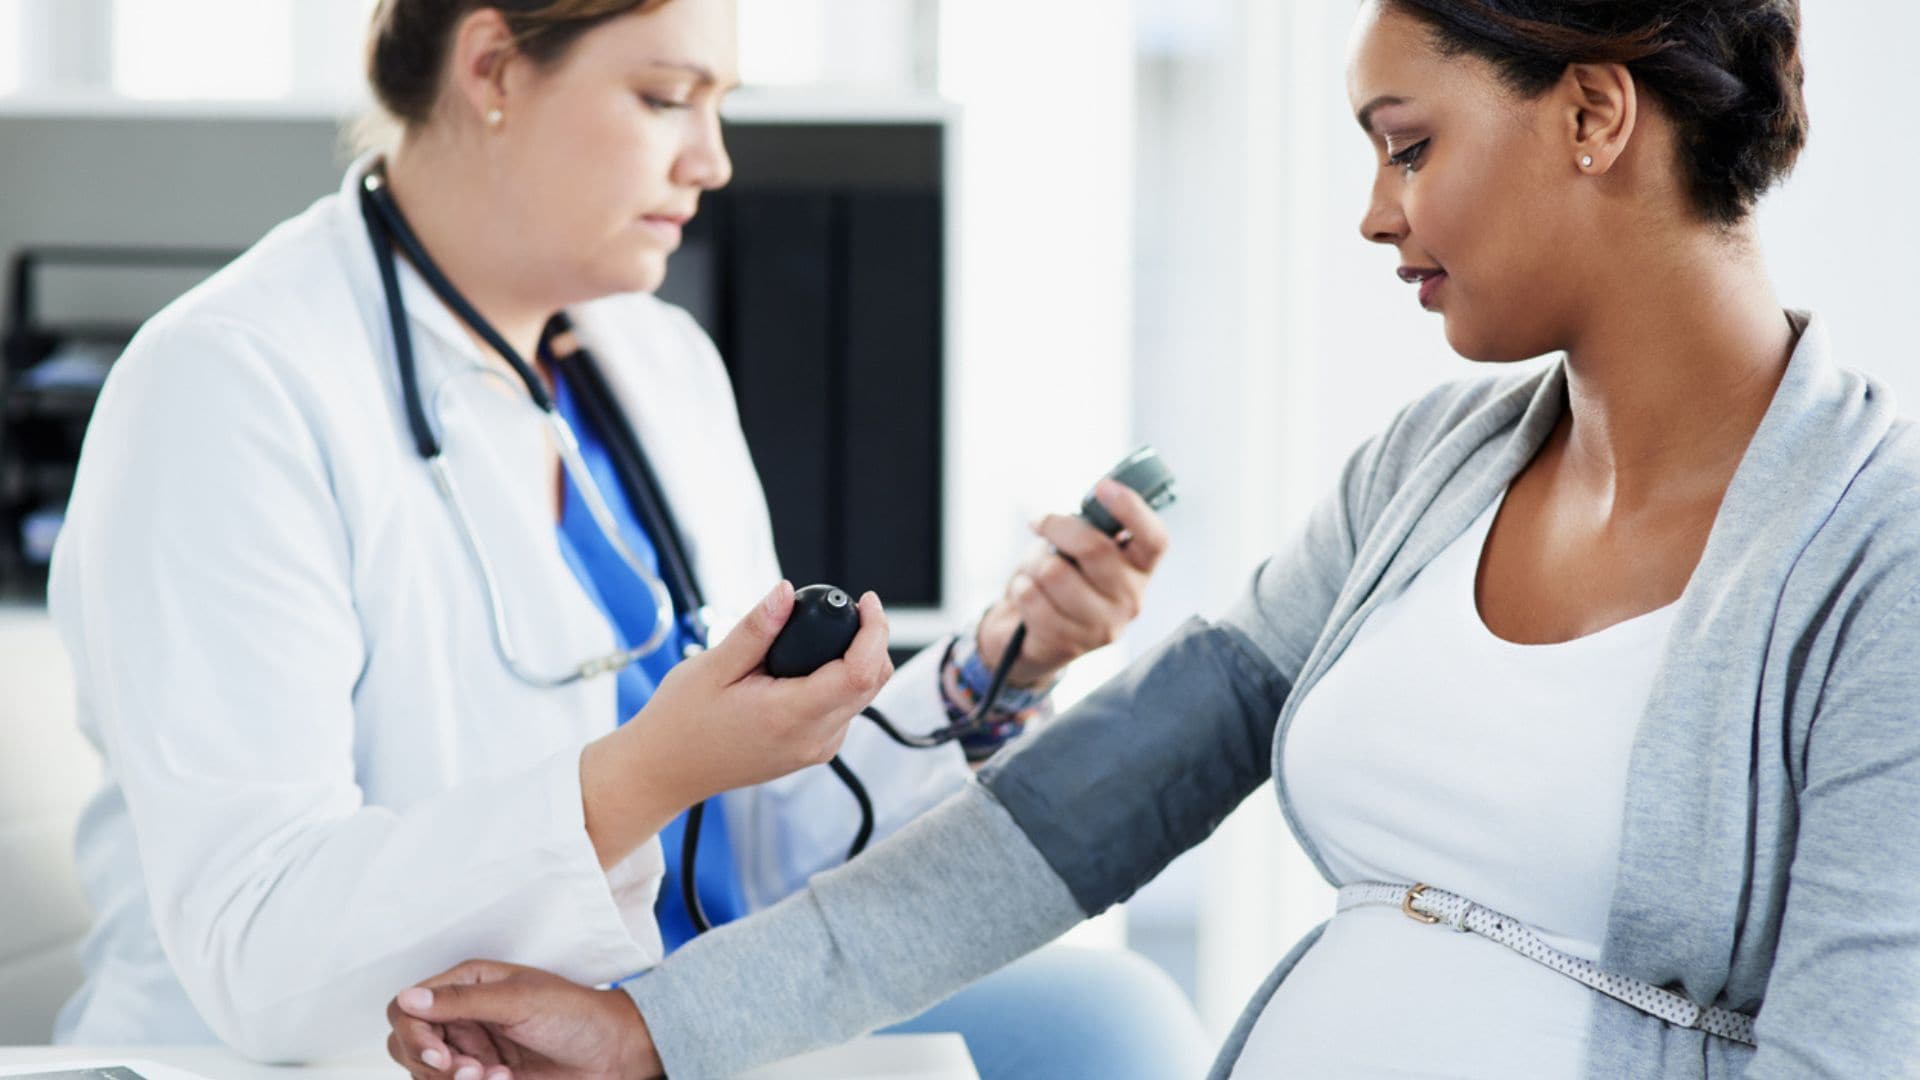 Doctor taking pregnant woman's blood pressure